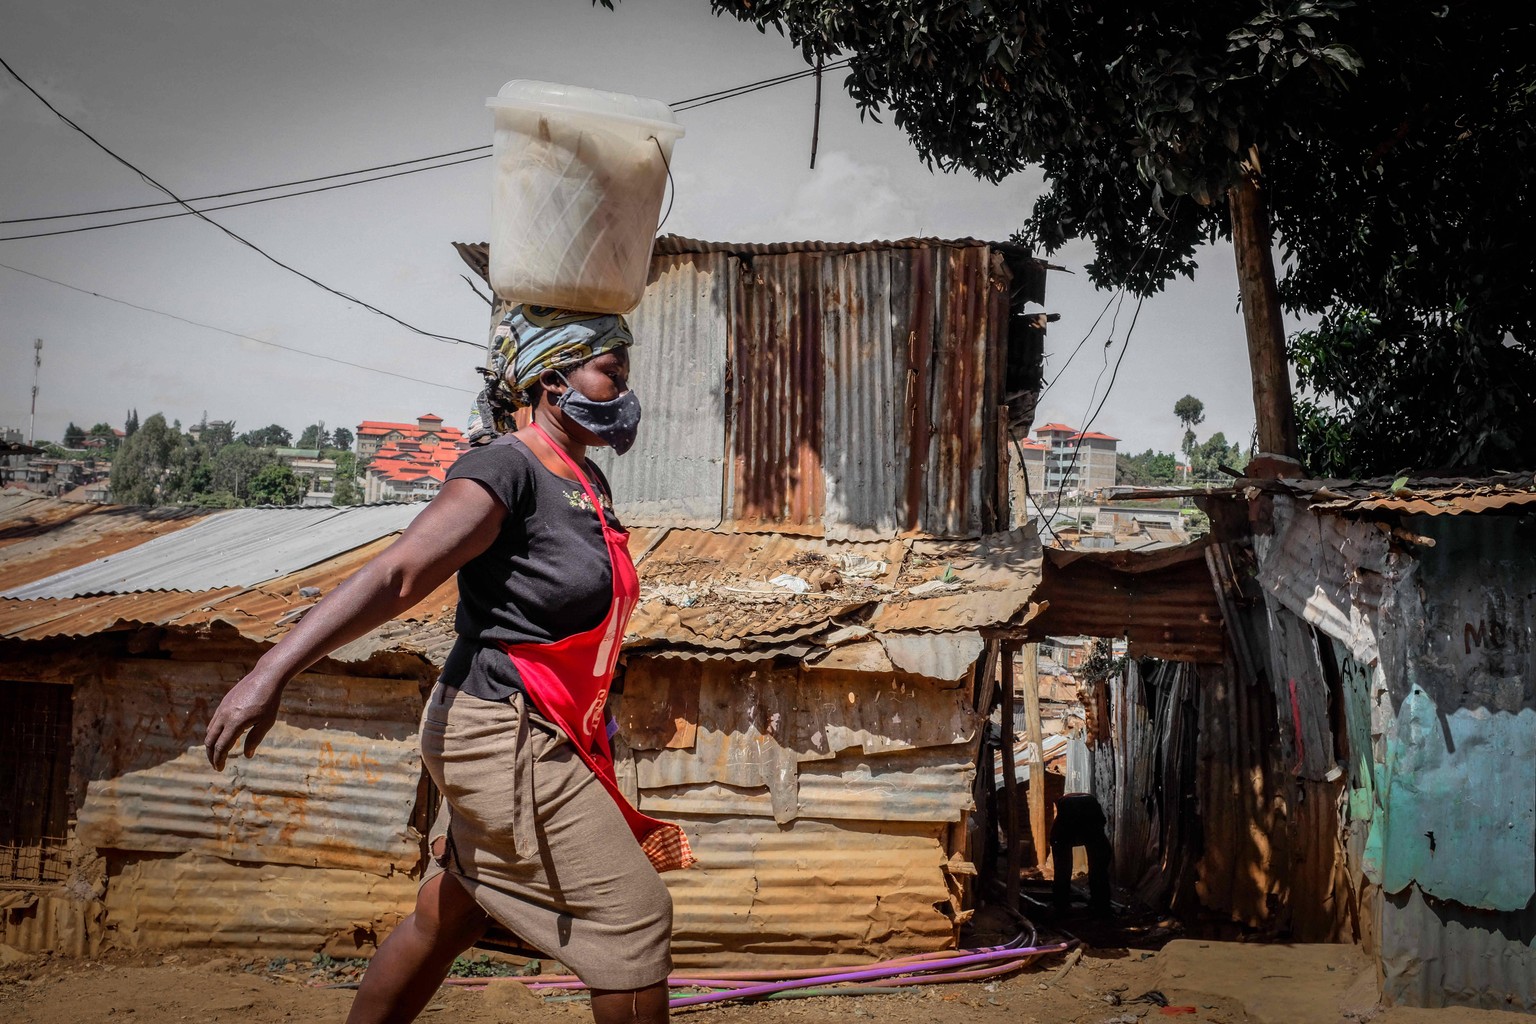 June 4, 2020, Nairobi, Kenya: A mobile business woman marching past the busy streets protected in her safety Face Mask. Nairobi Kenya - ZUMAd156 20200604zipd156002 Copyright: xDonwilsonxOdhiambox